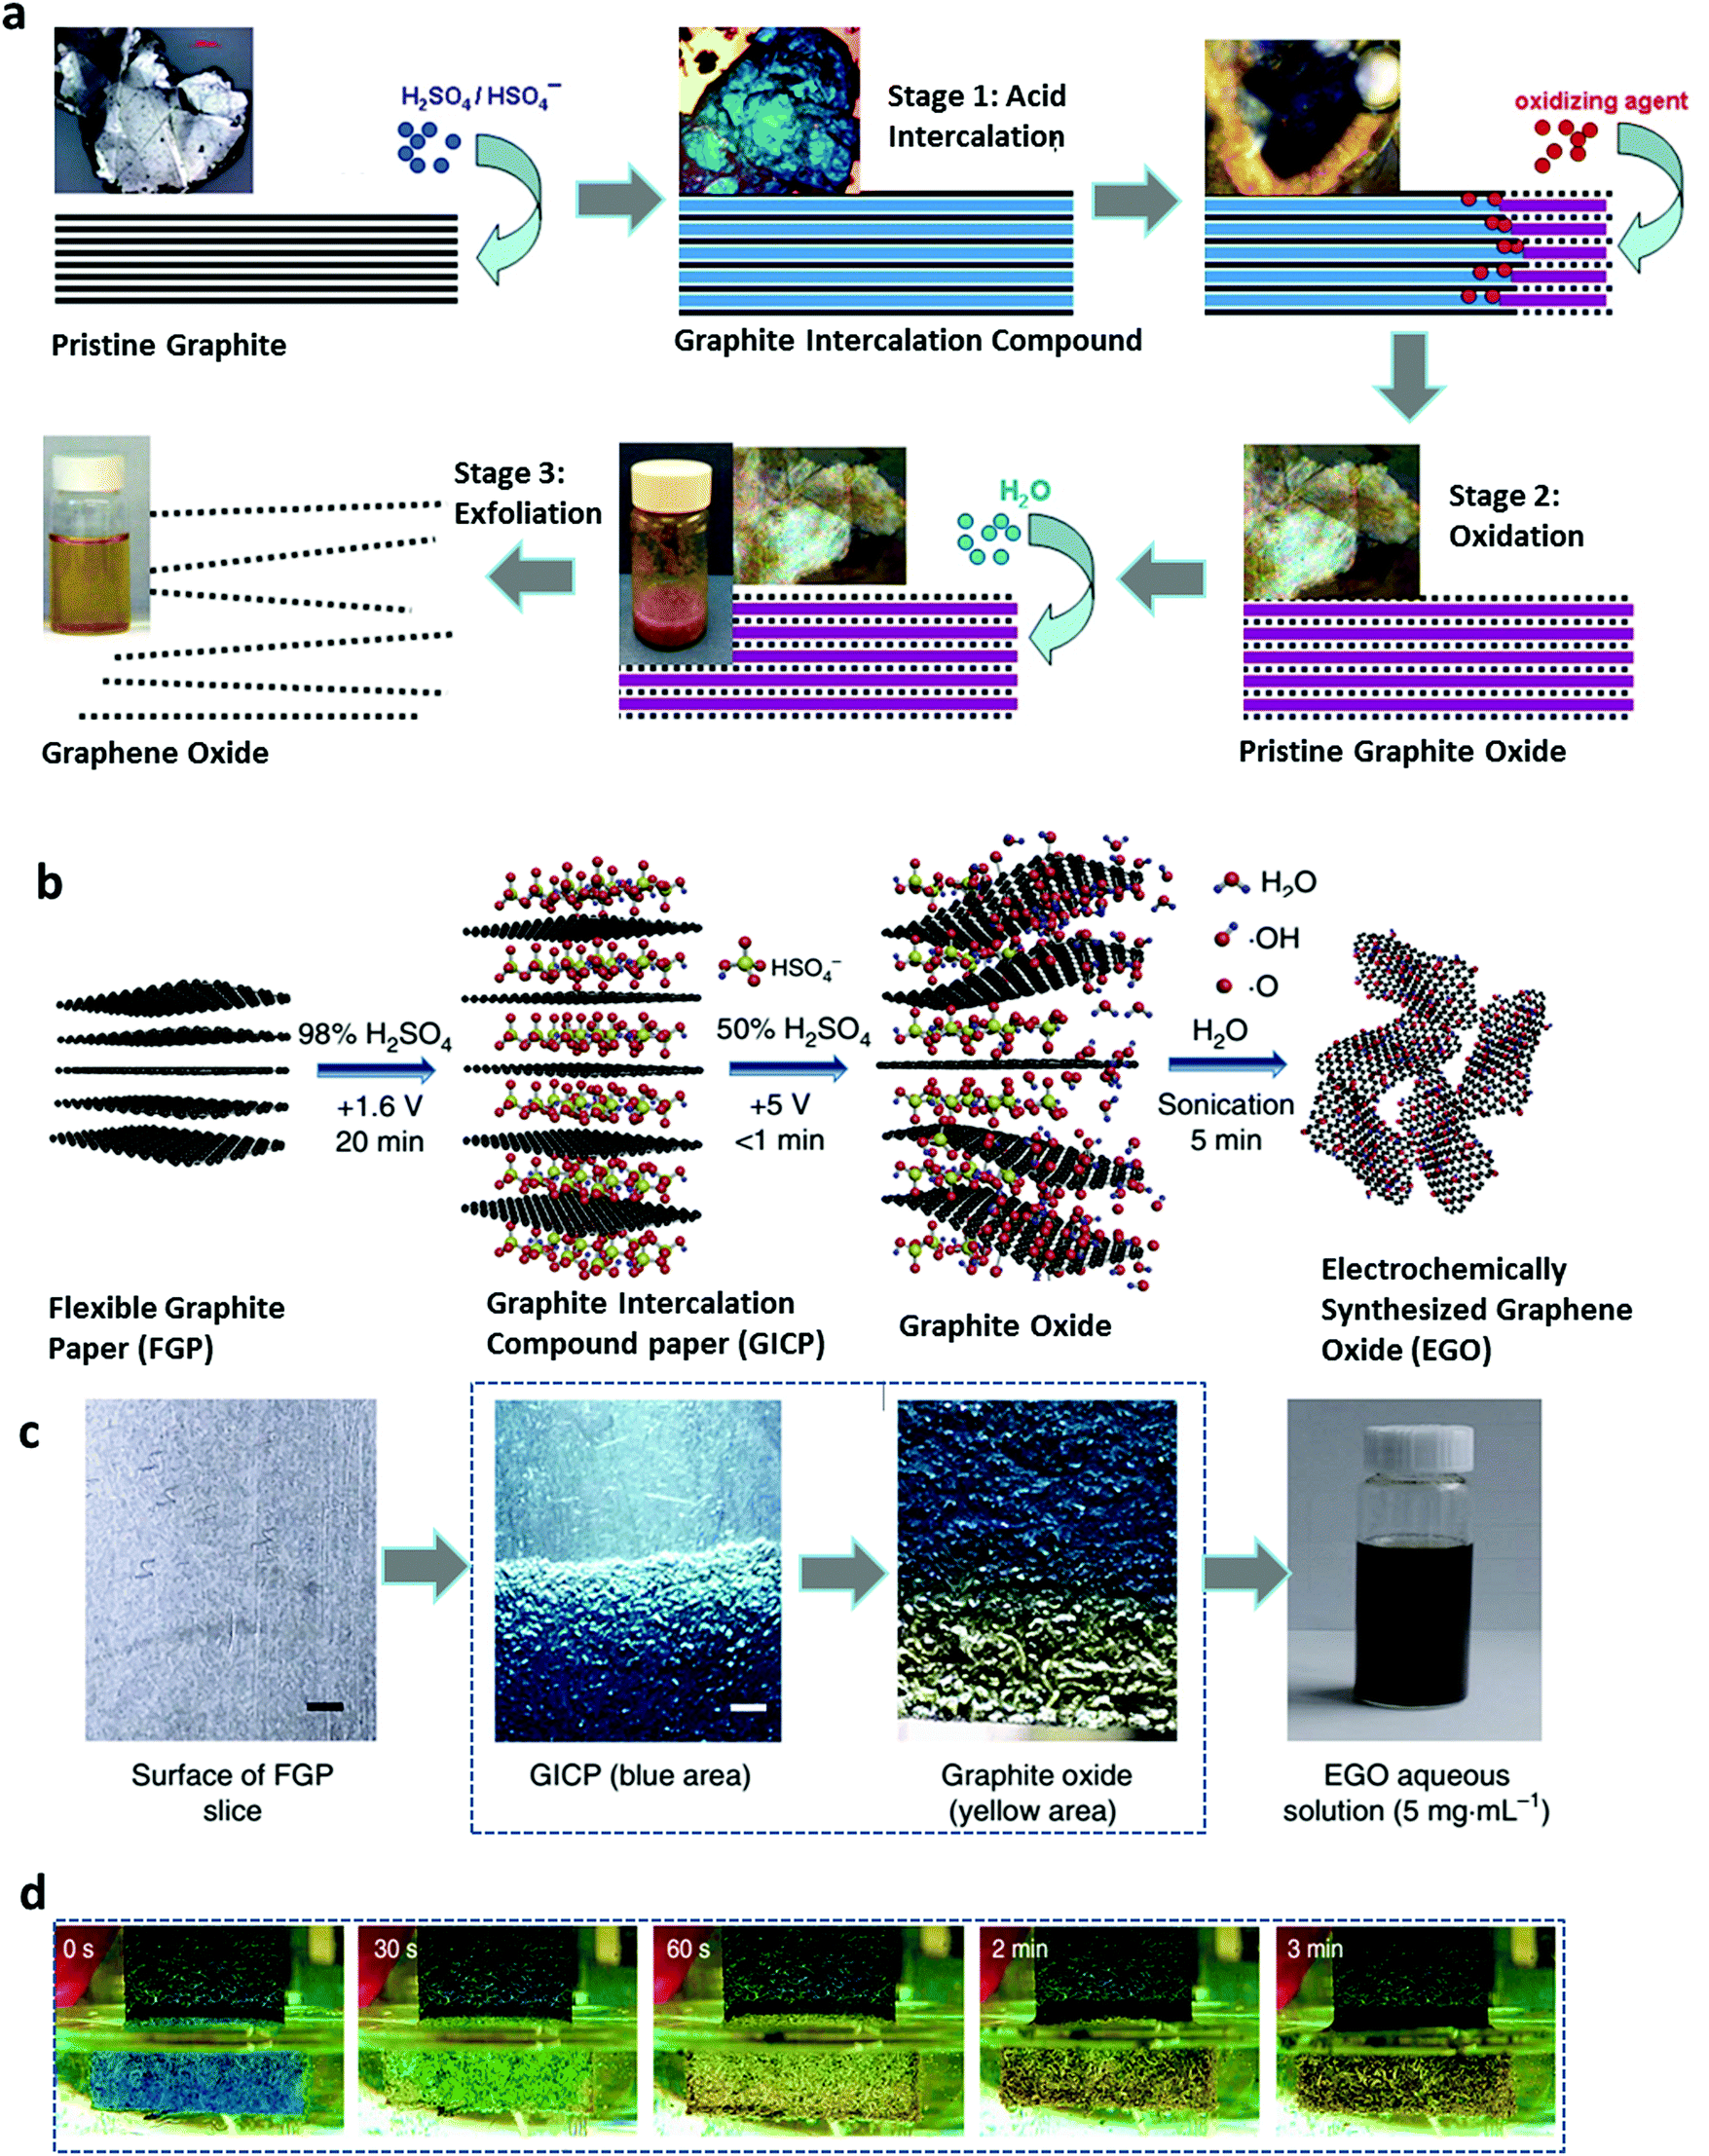 Graphene oxide liquid crystals: a frontier 2D soft material for graphene-based  functional materials - Chemical Society Reviews (RSC Publishing)  DOI:10.1039/C8CS00299A